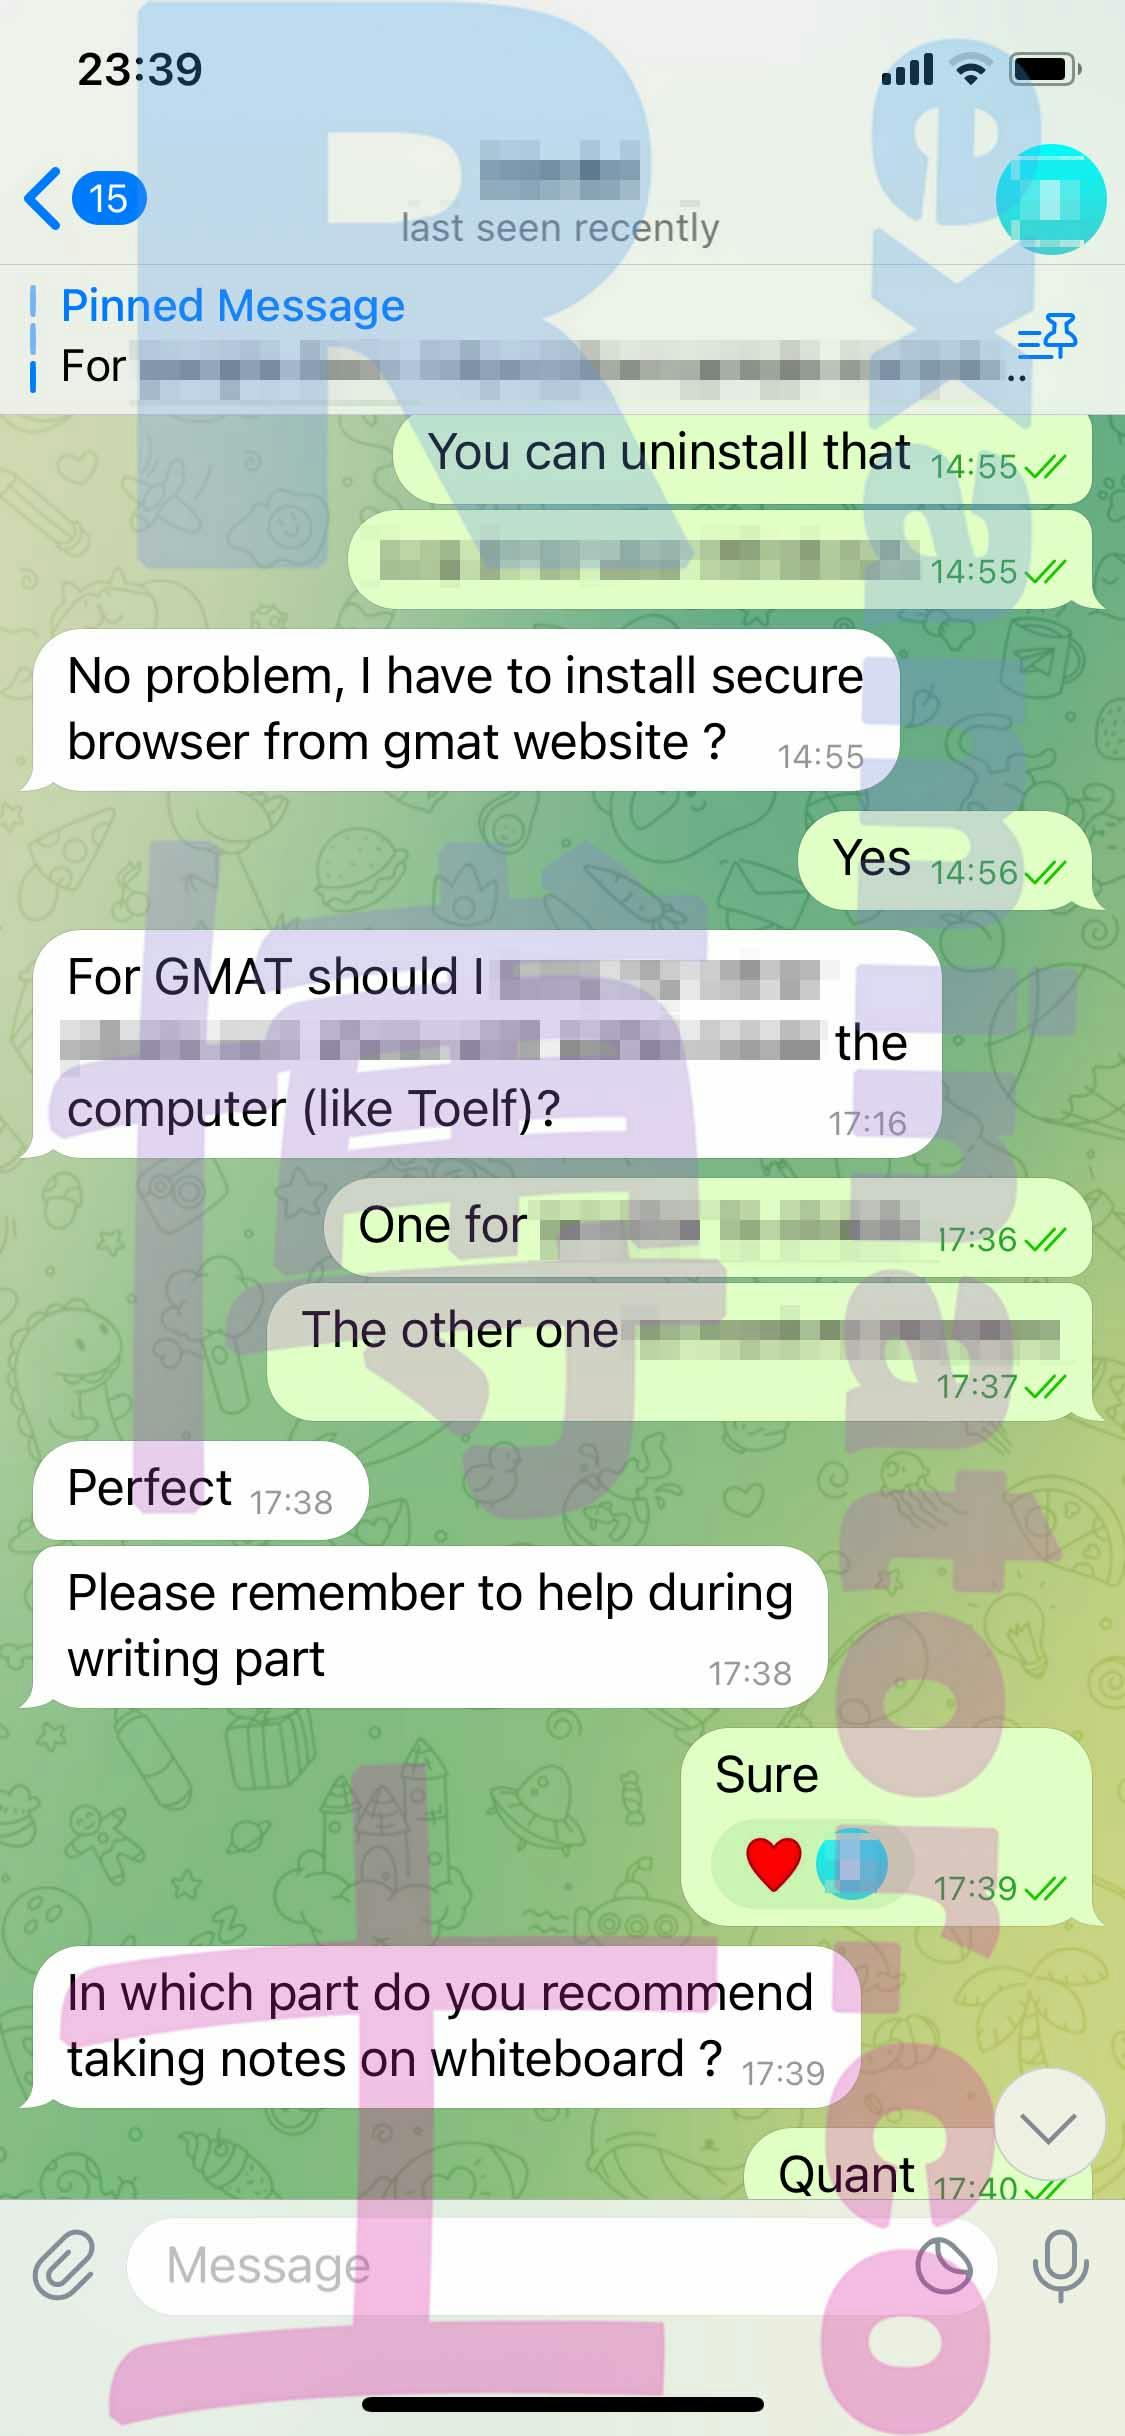 GMAT Online 700+ done! ✅  The customer was happy with the scores: "Very great scores on verbal and quant. I can refer my friends to you - they will pay upfront as I can vouch for your services!"  Don't panic if the proctor interrupts you and asks to see your environment a few times in the course of your test. This happens a lot and has no bearing on the validity of your score! 🧘🏻‍♀️